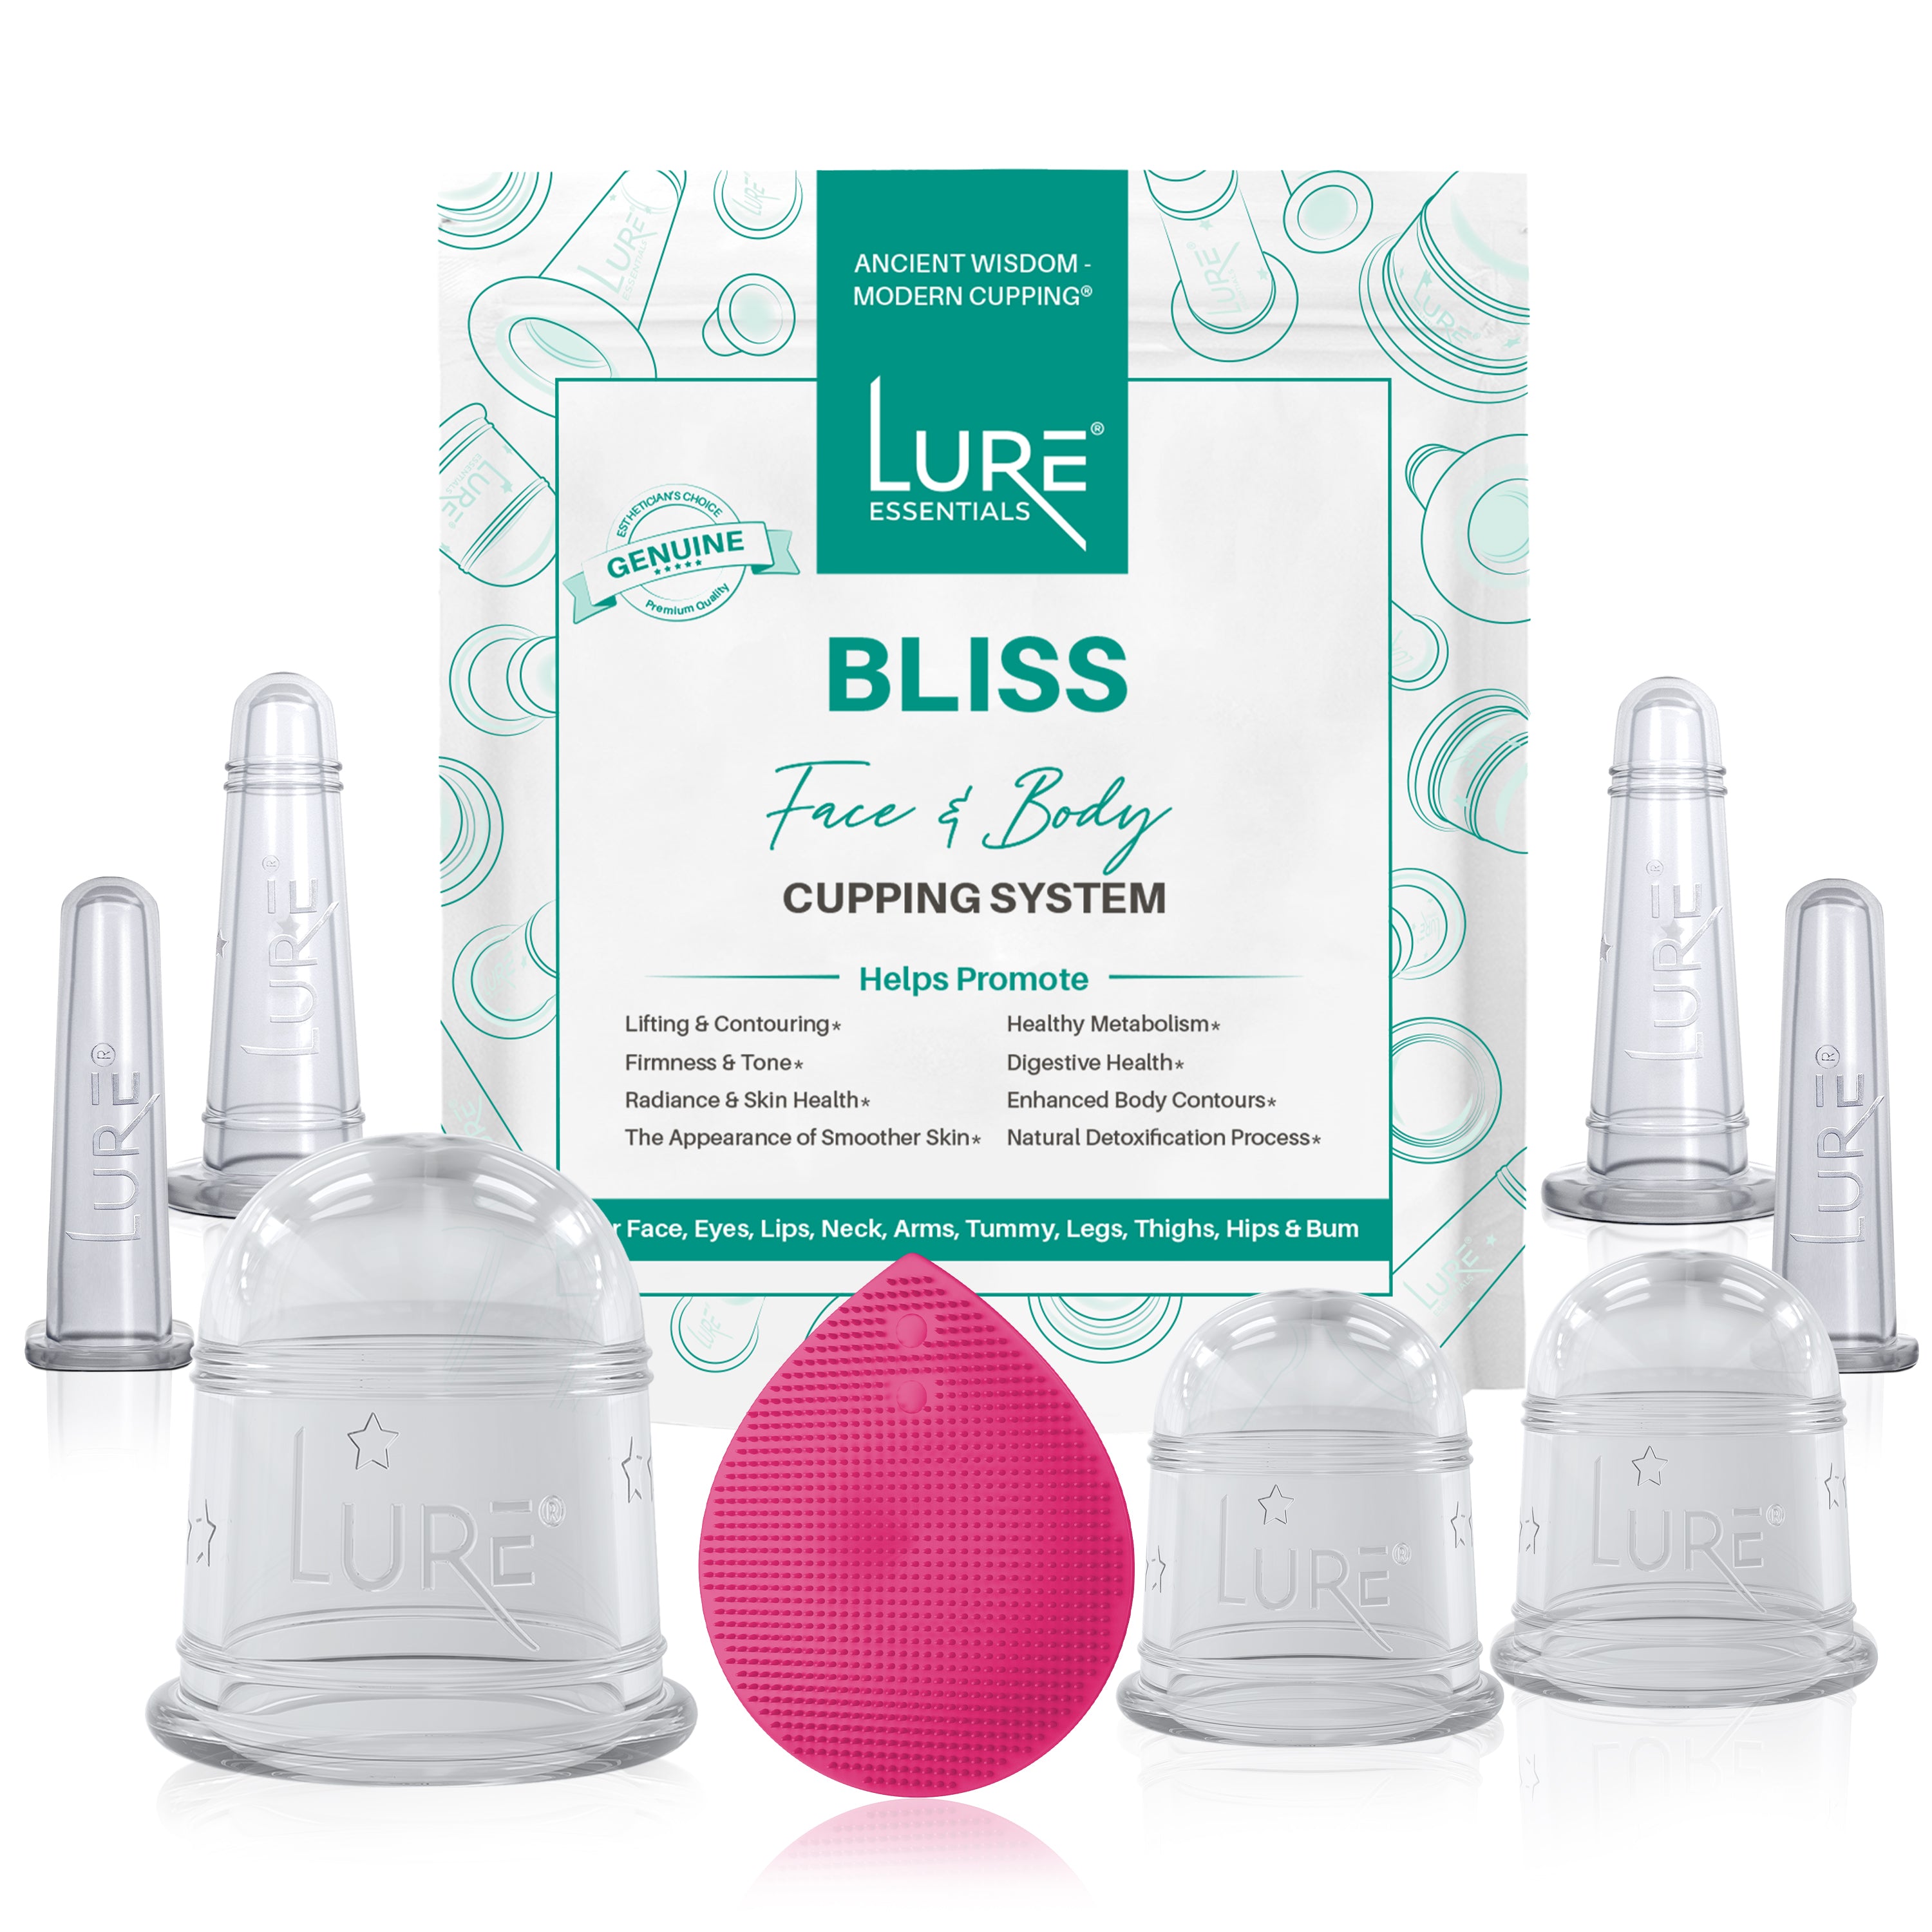 Lure Essentials Glam Face Cupping Set Facial Set with Silicone Brush Anti-Aging Face Lift Cupping Massage Free PDF Book for Professional and Home